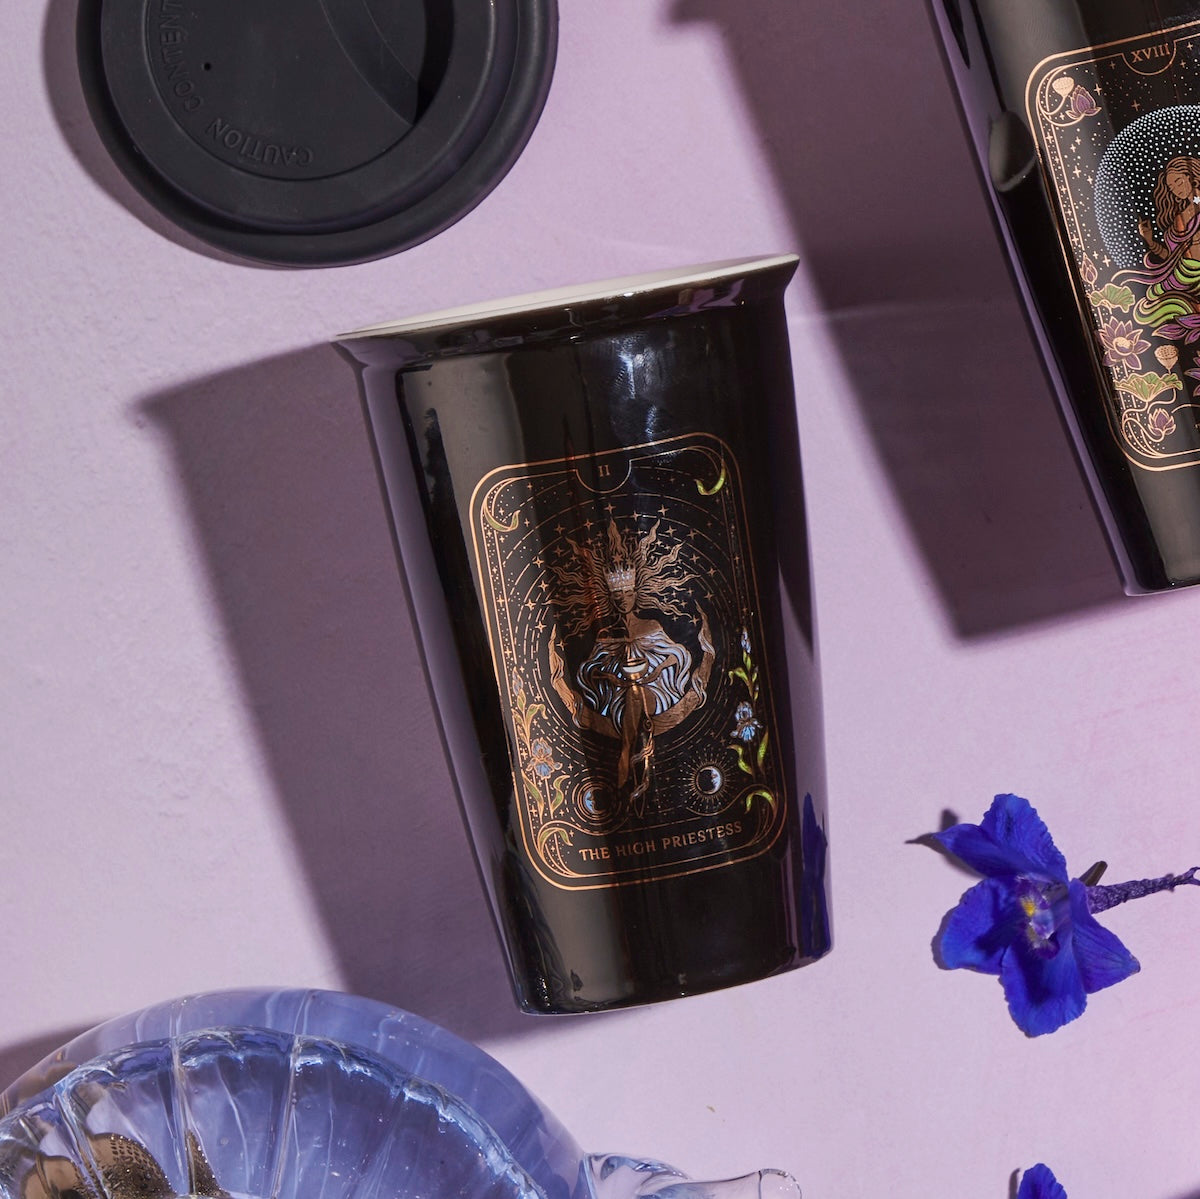 A black reusable cup with an artistic design labeled "The Queen of Cups - Tarot To Go!," featuring intricate, mystical imagery, perfect for savoring your favorite organic tea. The cup sits on a pink surface, accompanied by a matching lid, a blue flower, and part of a clear glass dish.